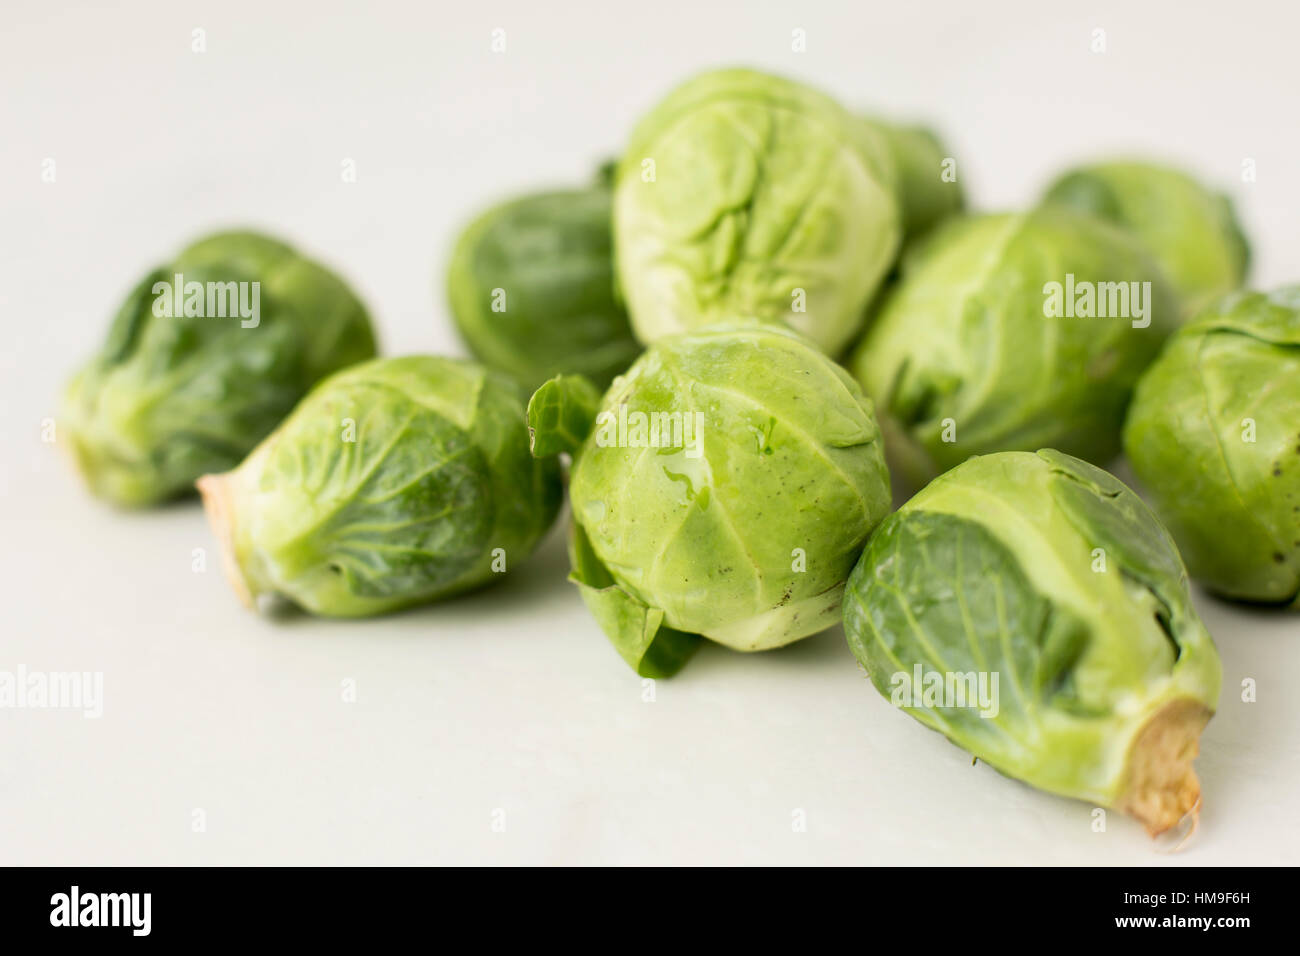 a close-up angle on a pile of organic brussels sprouts on a white table Stock Photo